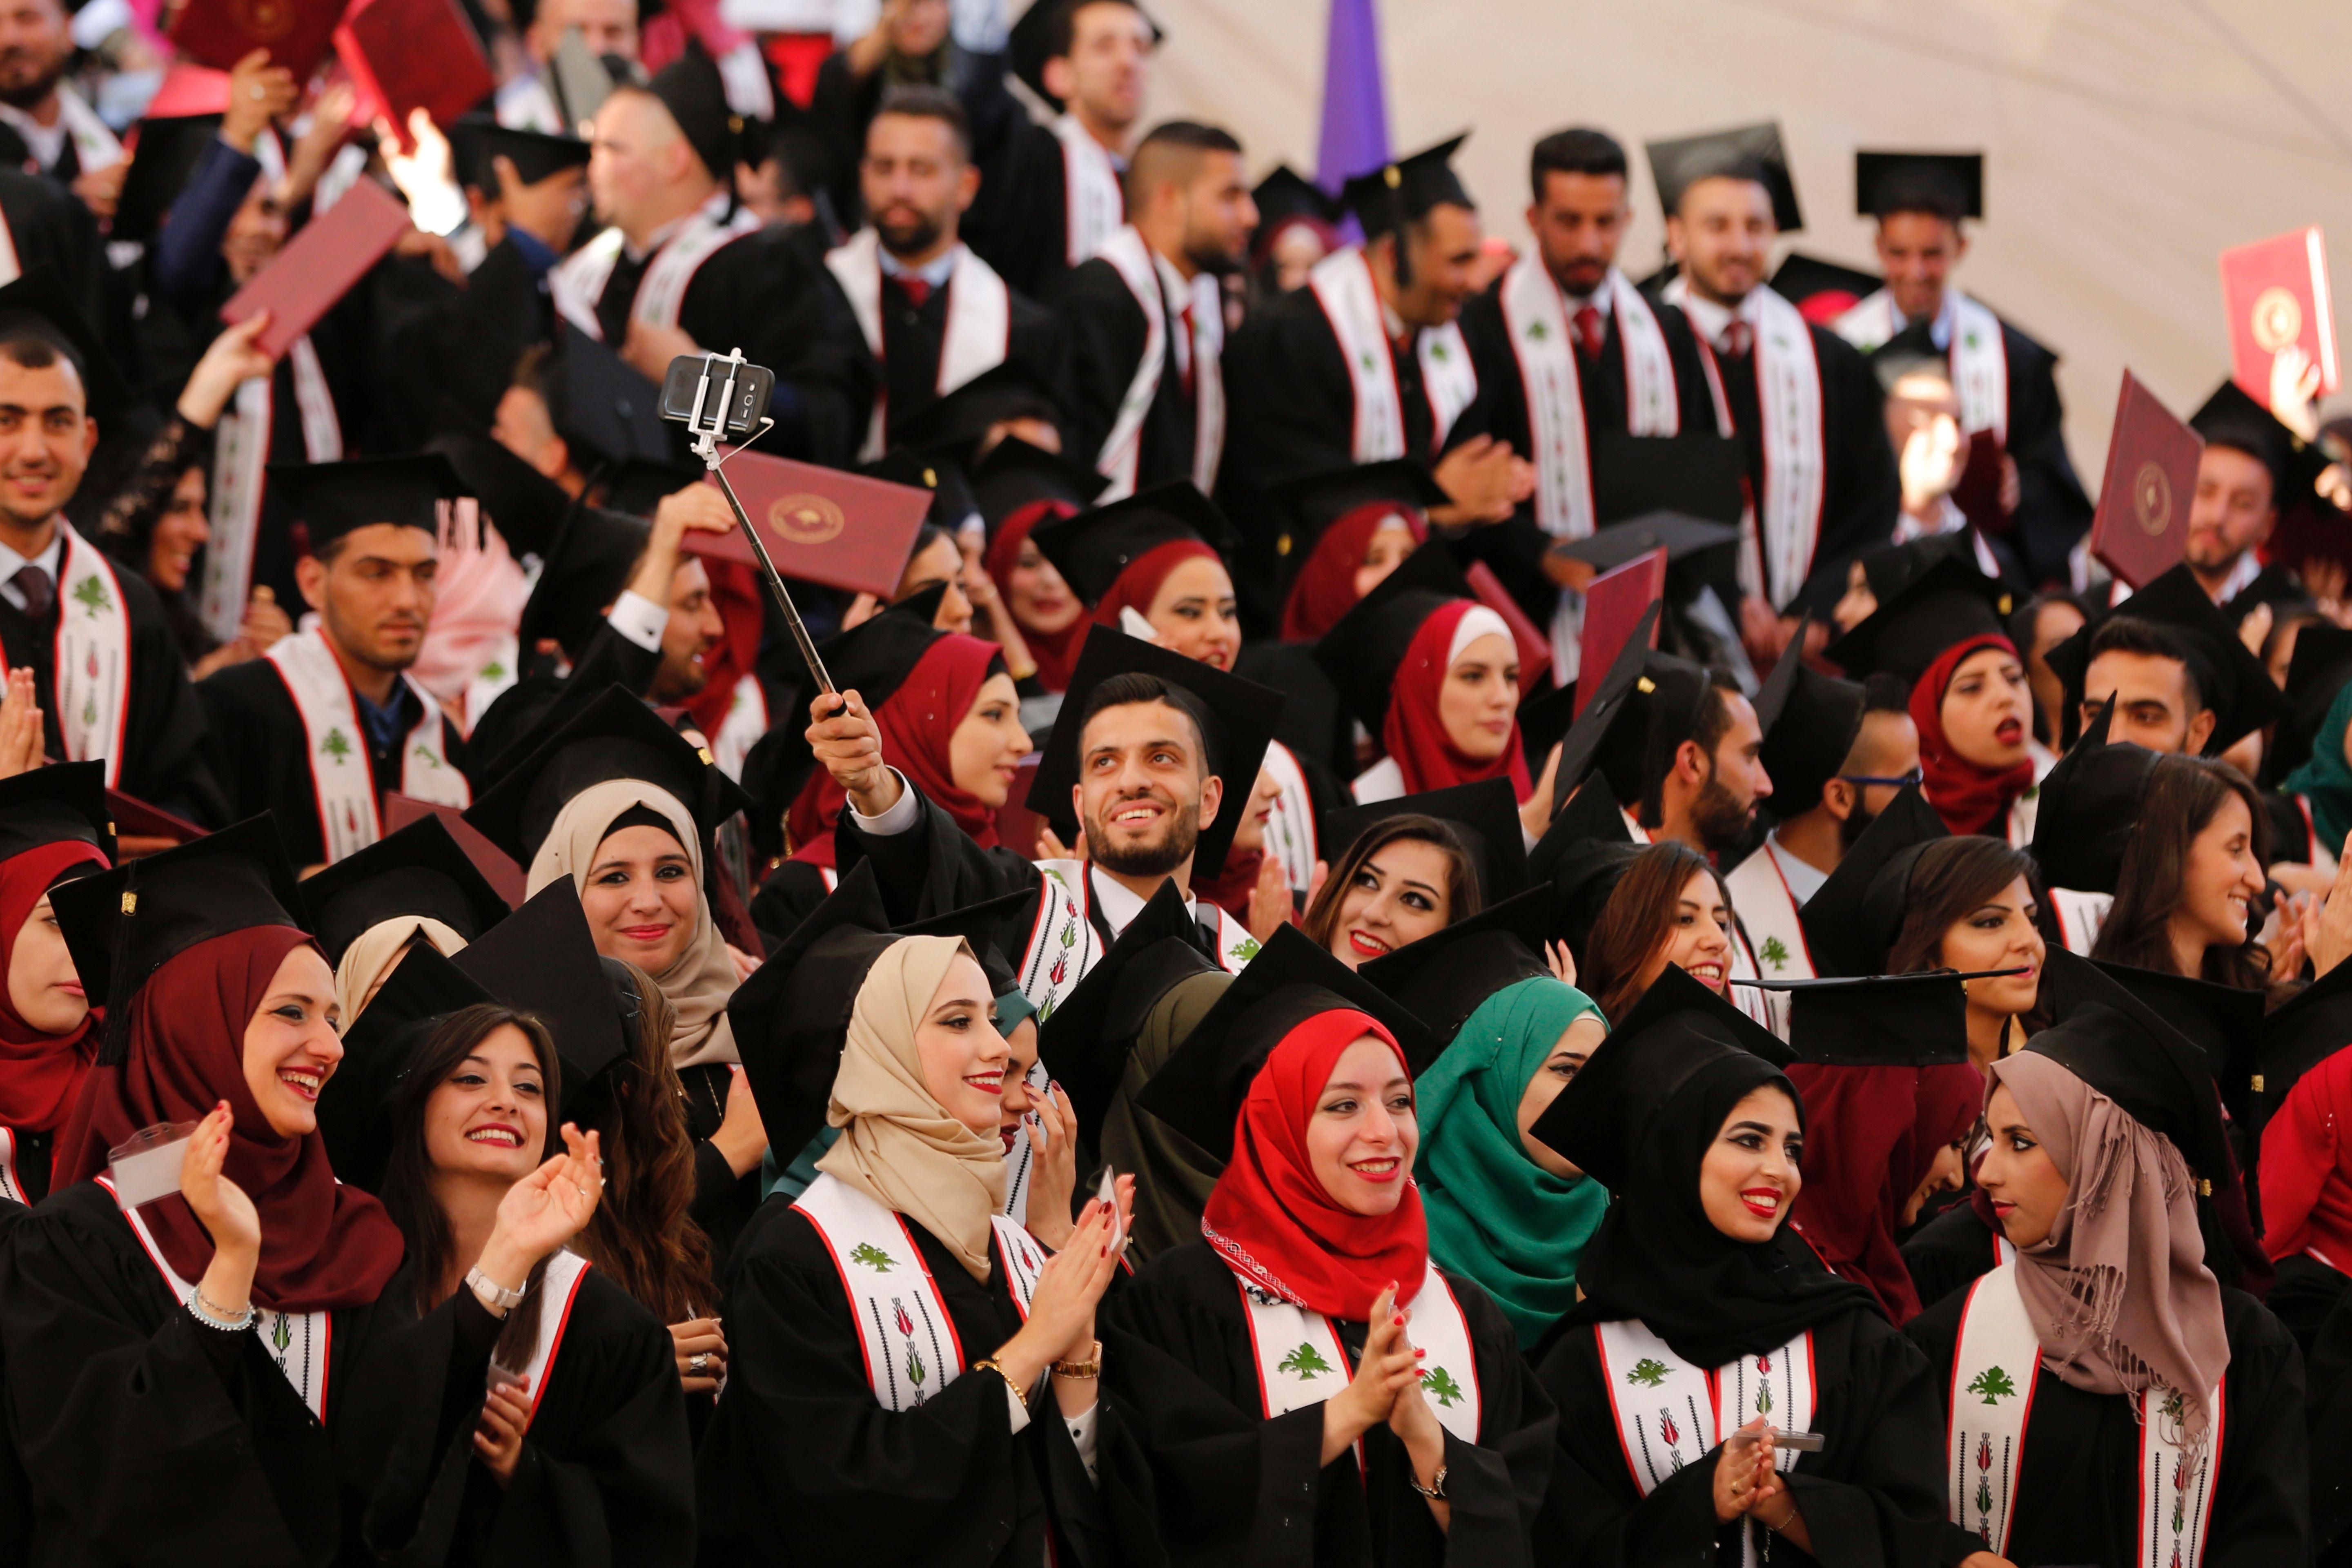 A Palestinian student takes a selfie during his graduation ceremony at the end of the academic year on May 20, 2016 at Birzeit University in the West Bank town of Birzeit, near Ramallah. / AFP / ABBAS MOMANI (Photo credit should read ABBAS MOMANI/AFP/Getty Images)